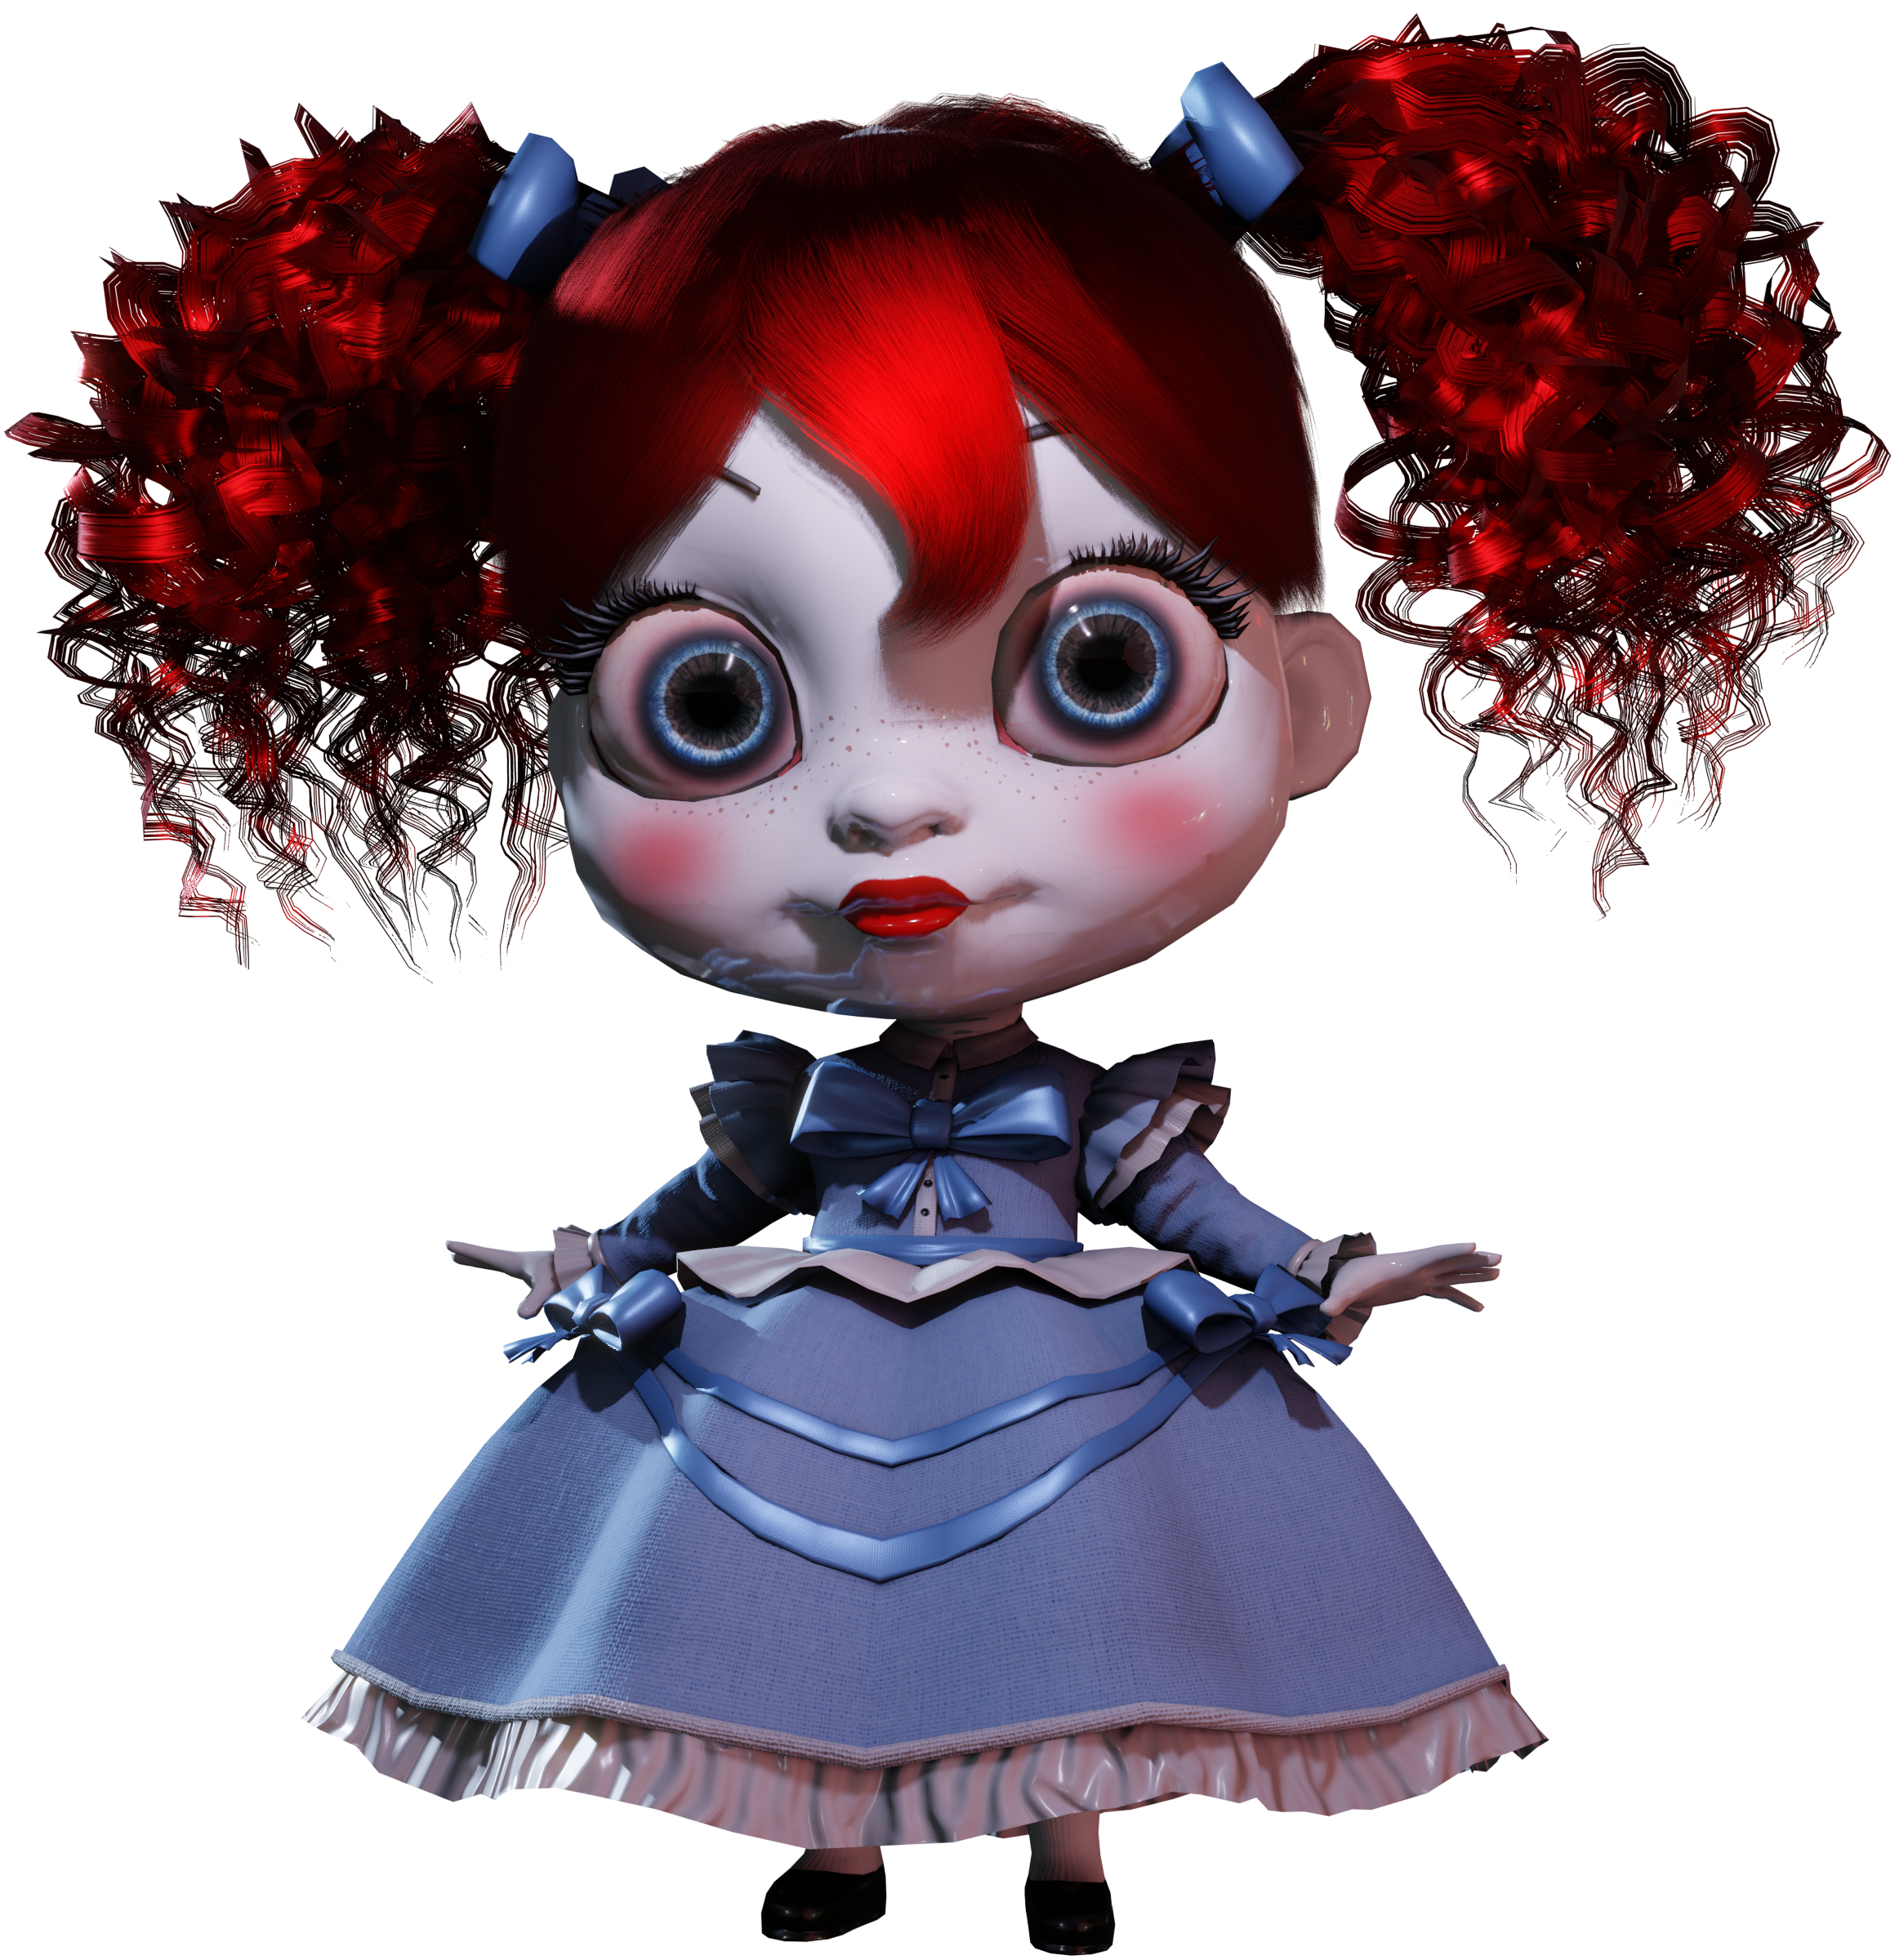 How old is Poppy Playtime the doll?